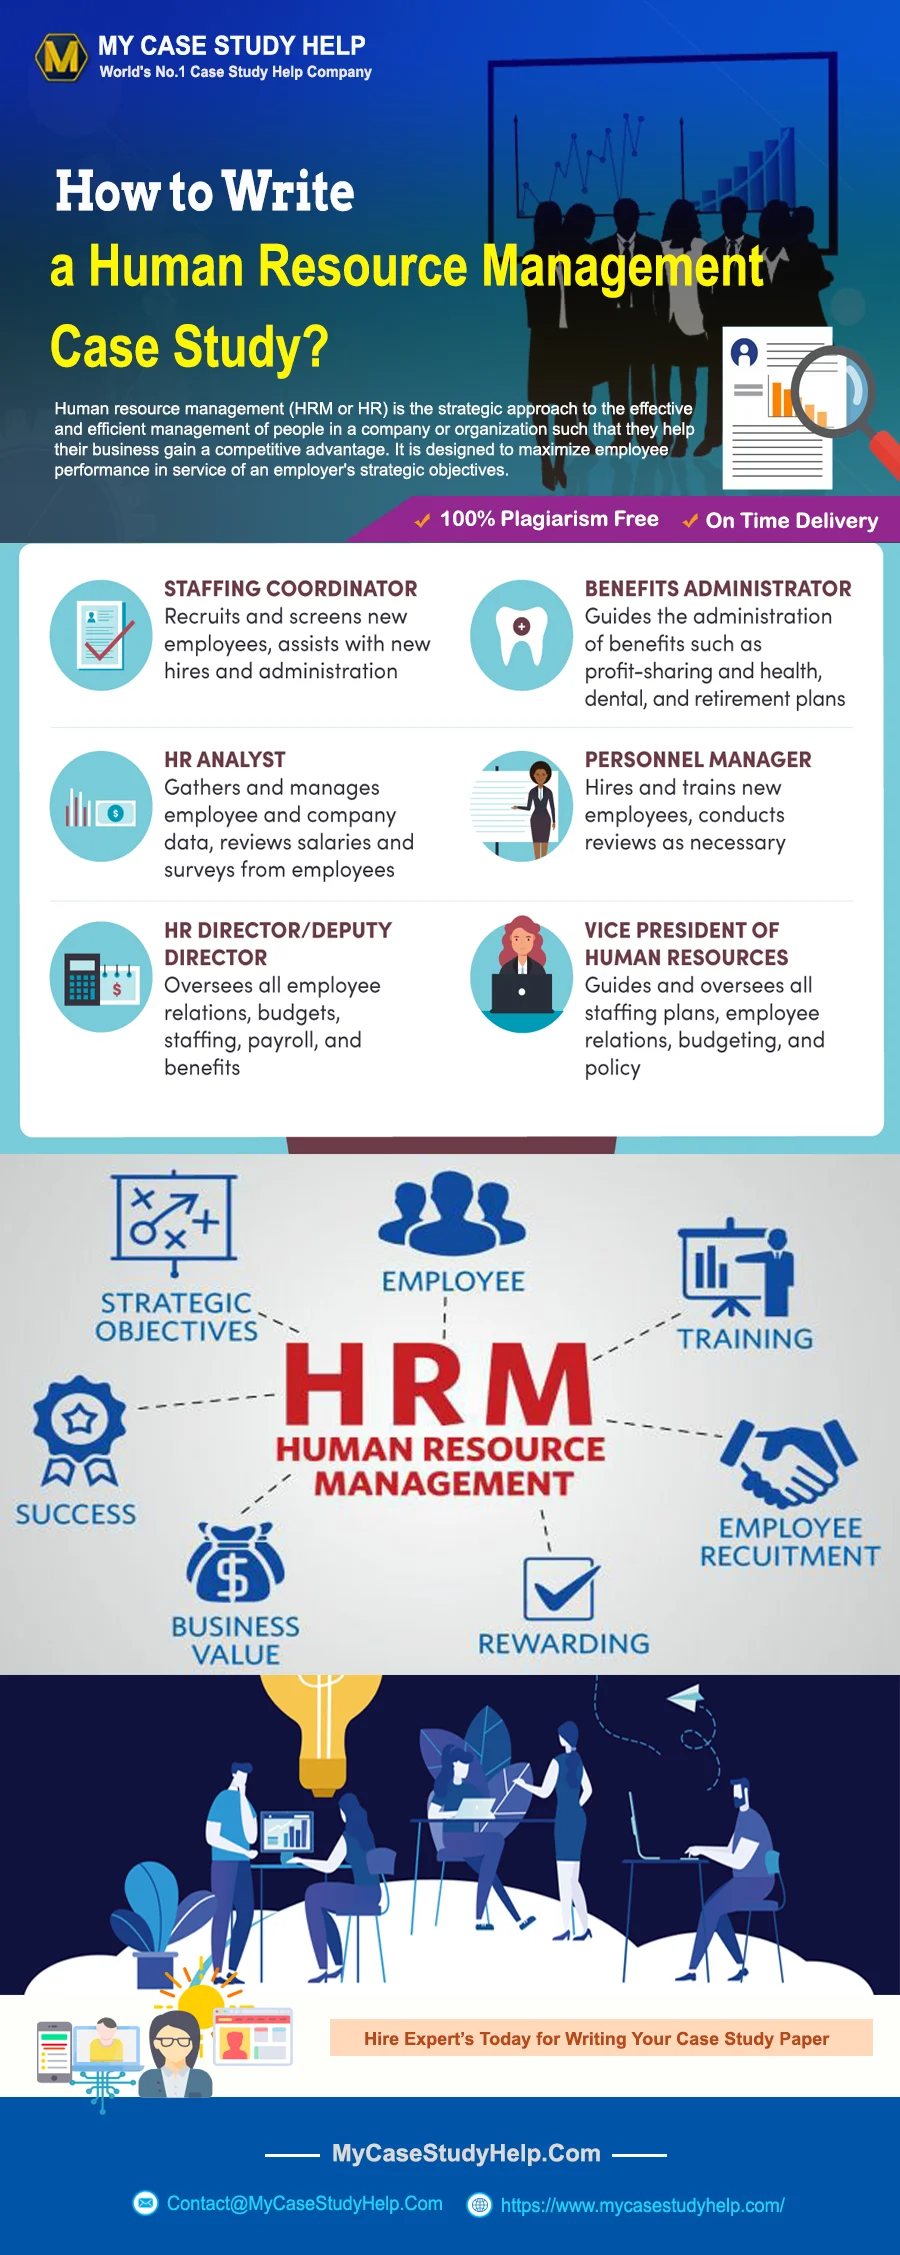 How to write a human resource management case study